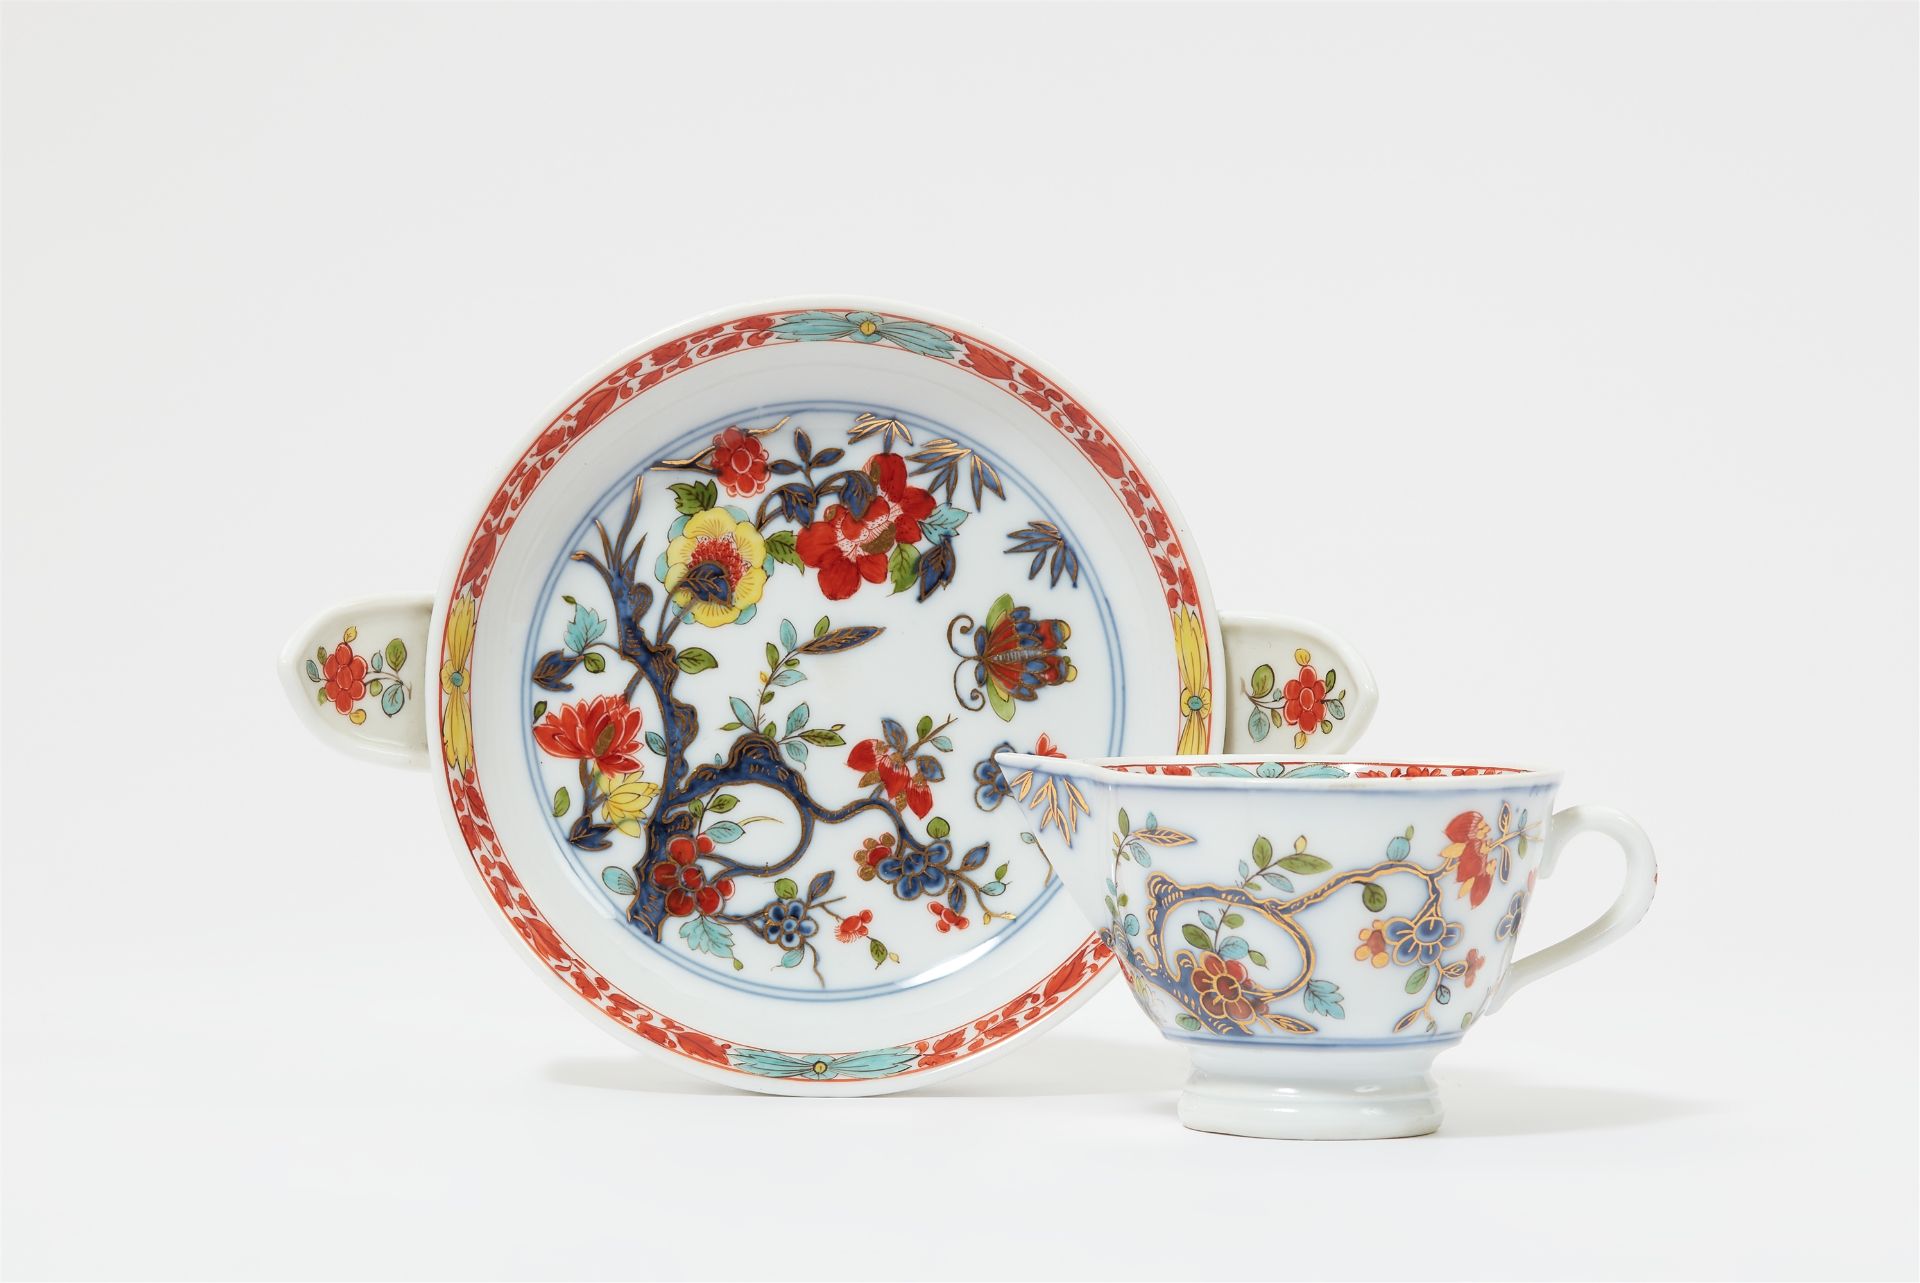 A Meissen porcelain cup and saucer with Imari style decor